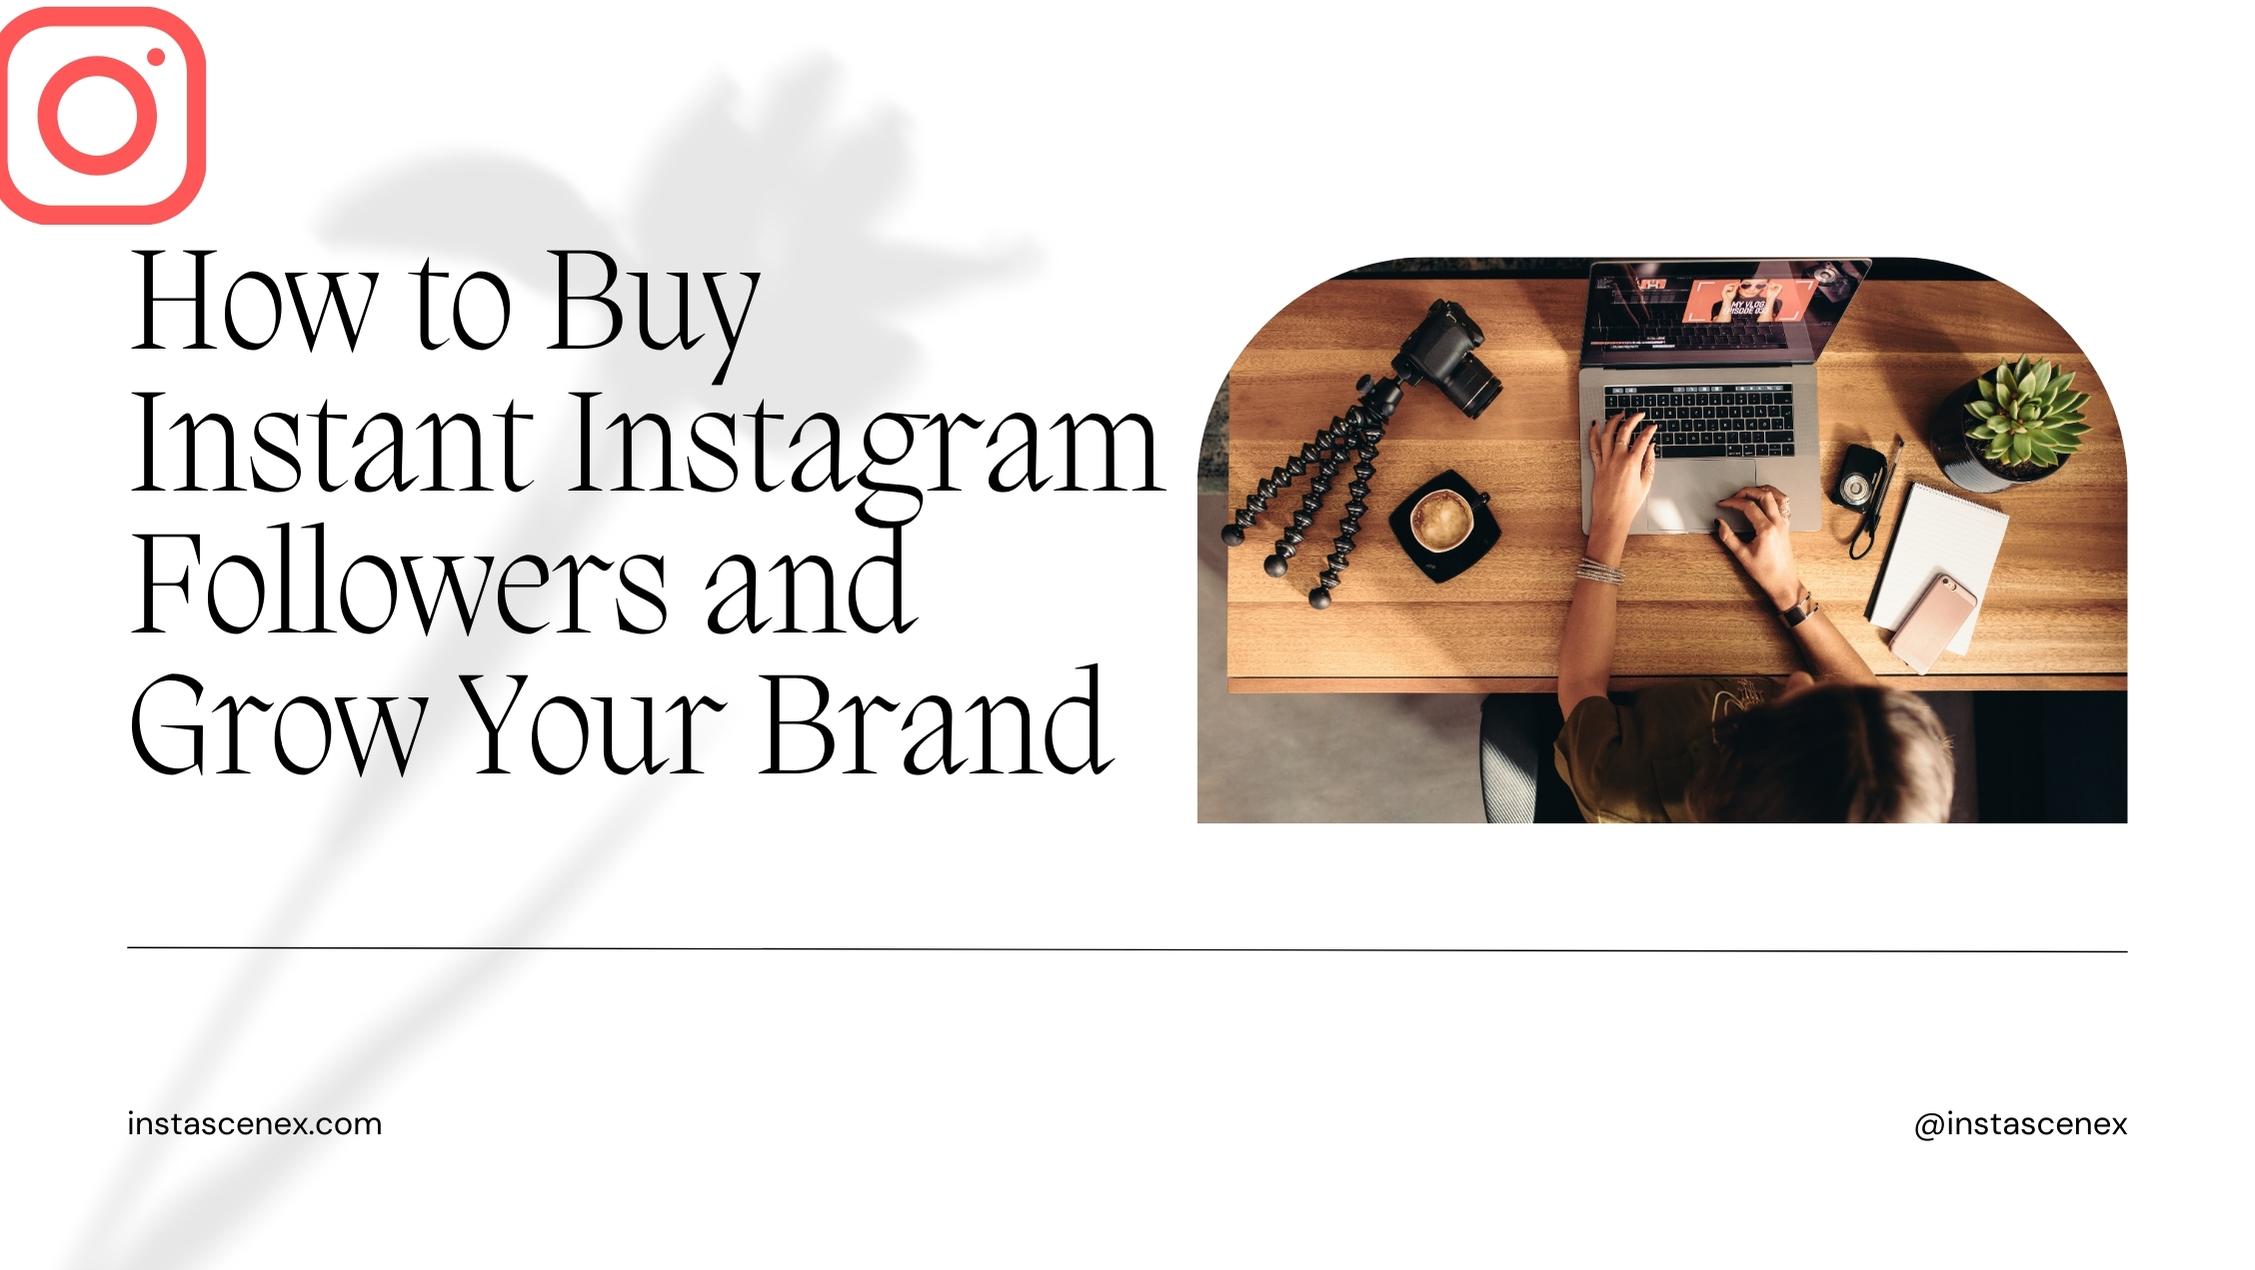 How to Buy Instant Instagram Followers